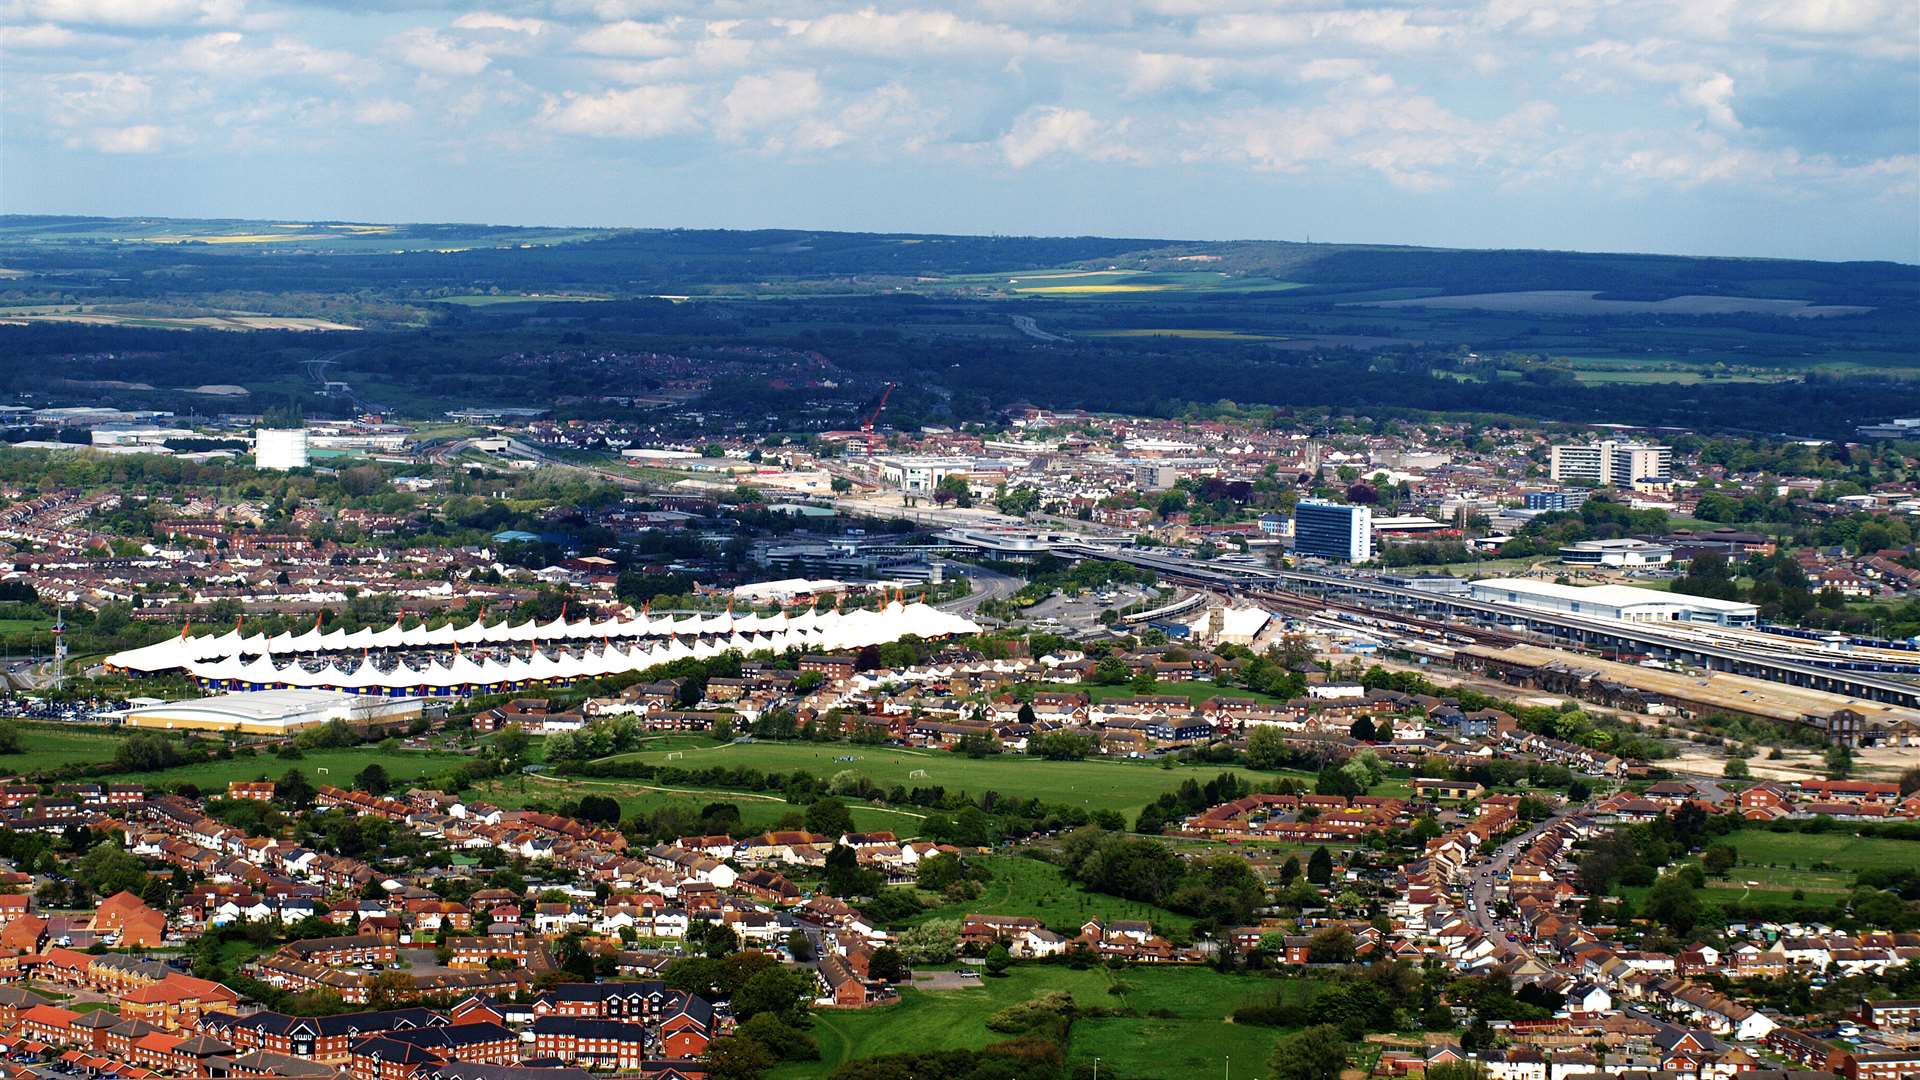 An aerial view of Ashford, with the Designer Outlet to the left, the International Station in the centre, next to International House, with the Panorama to the right